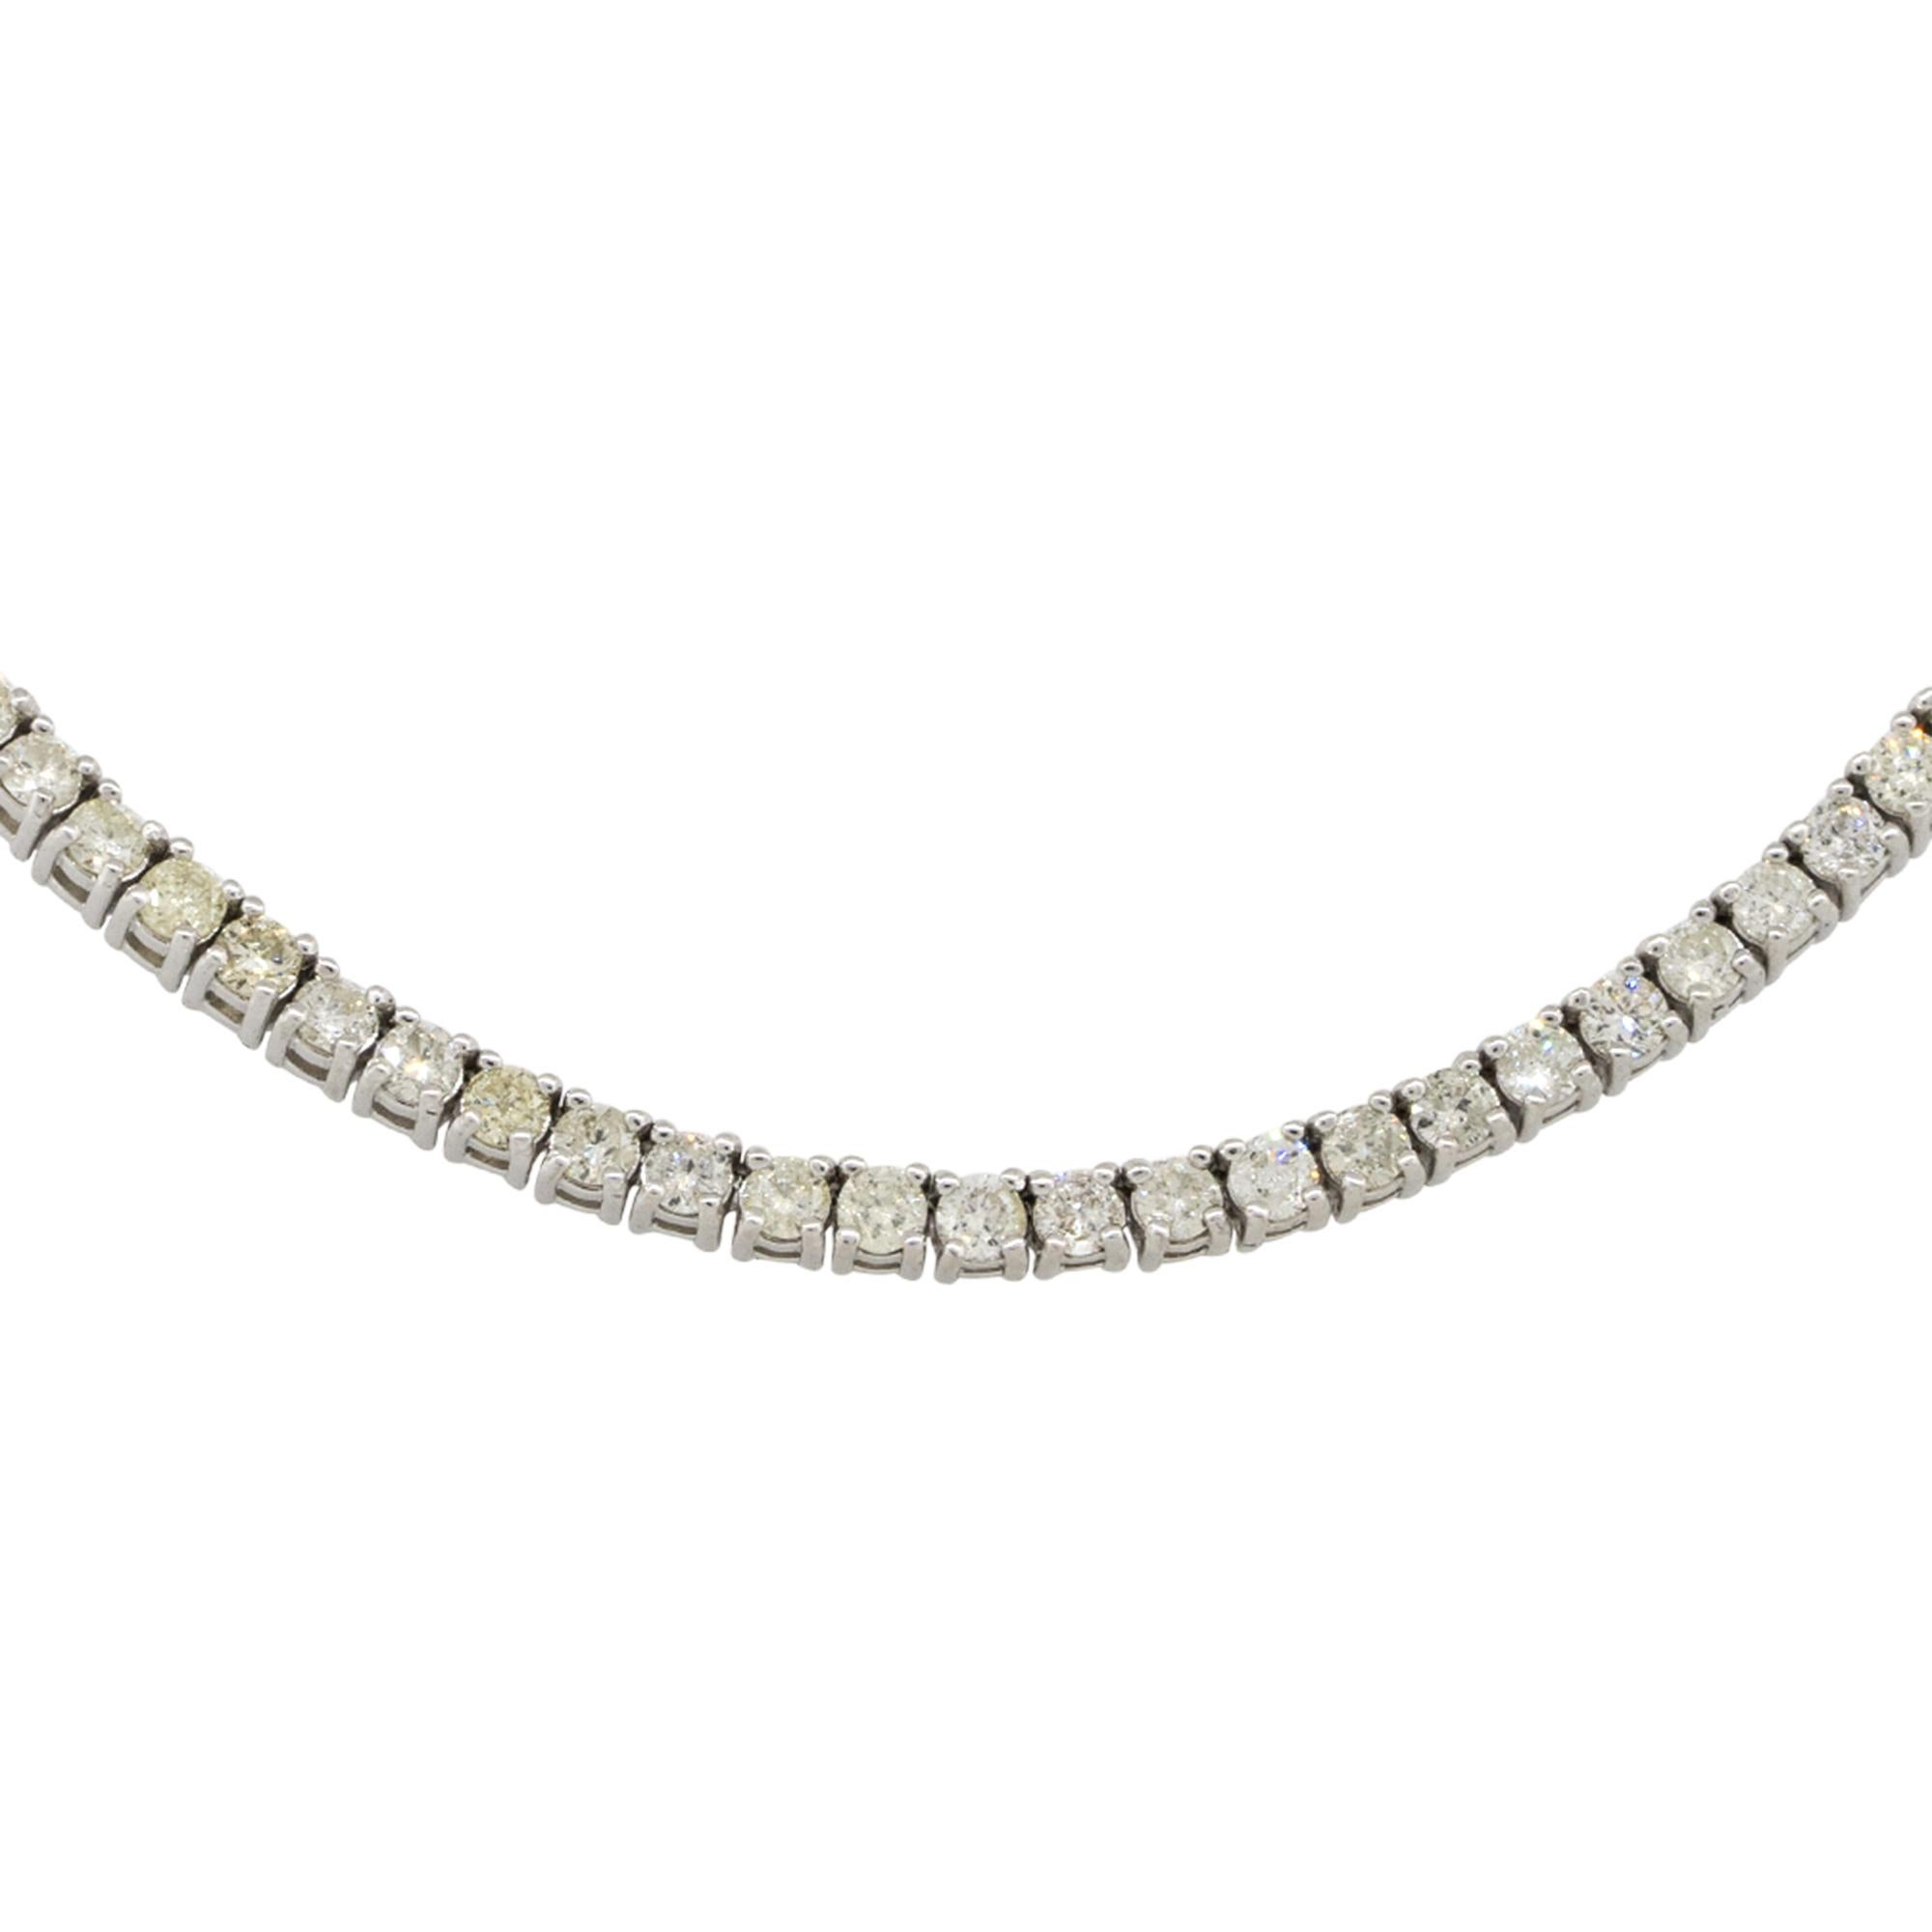 Material: 14k White Gold
Diamond Details: Approx. 9.66ctw of round cut Diamonds. Diamonds are G/H in color and VS in clarity. 220 stones 
Measurements: Necklace measures 22